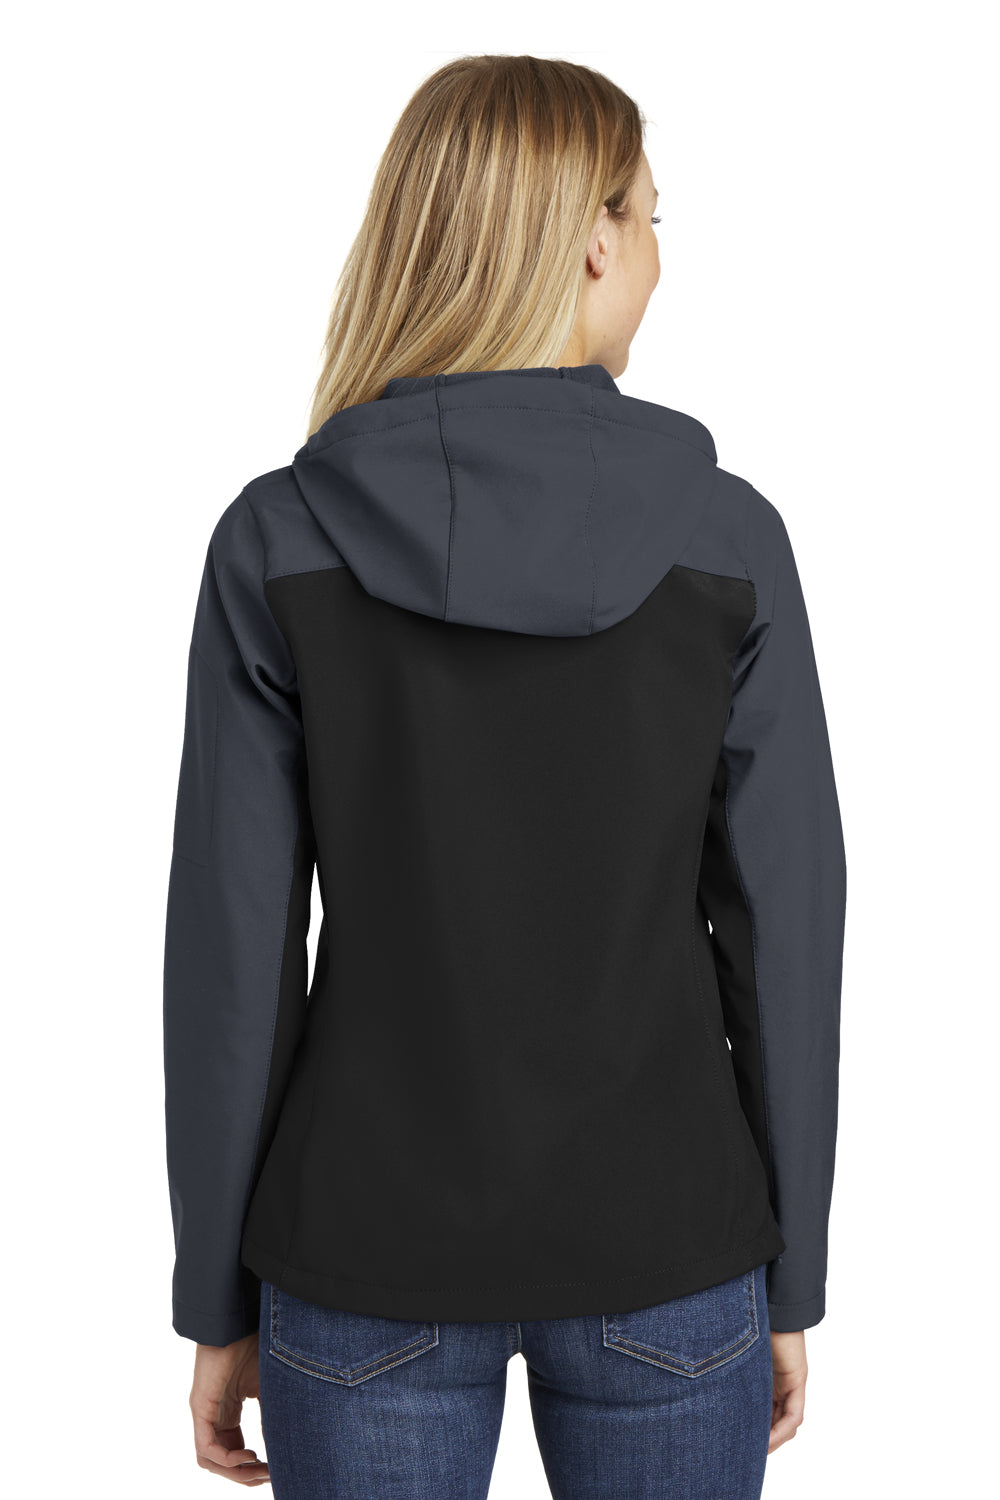 Port Authority L335 Womens Core Wind & Water Resistant Full Zip Hooded Jacket Black/Grey Back